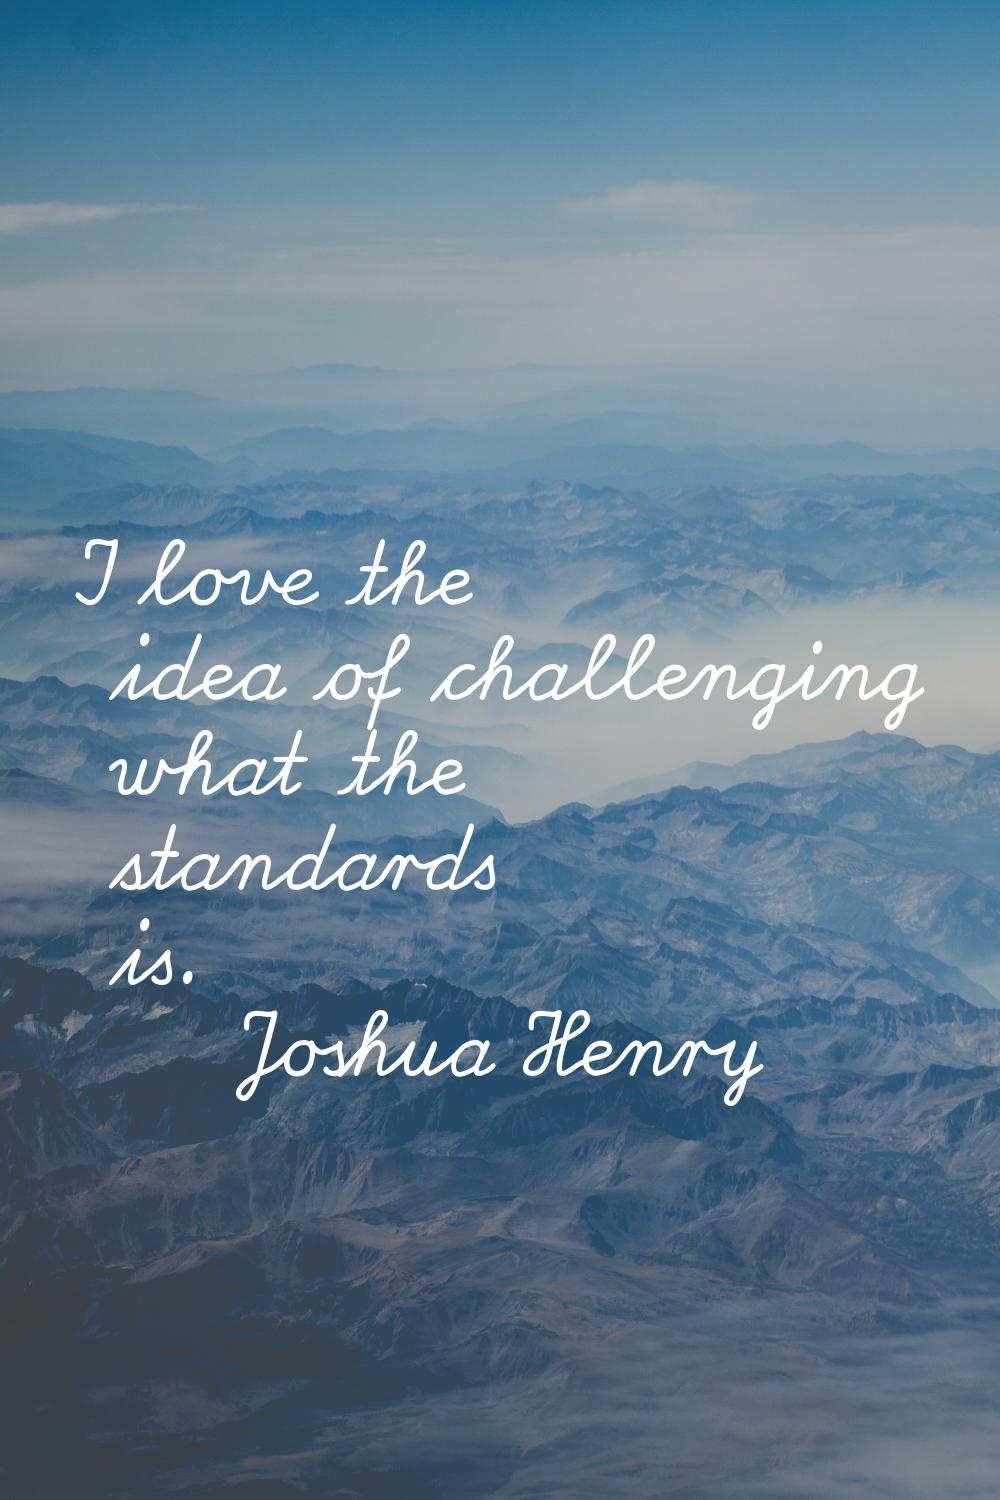 I love the idea of challenging what the standards is.